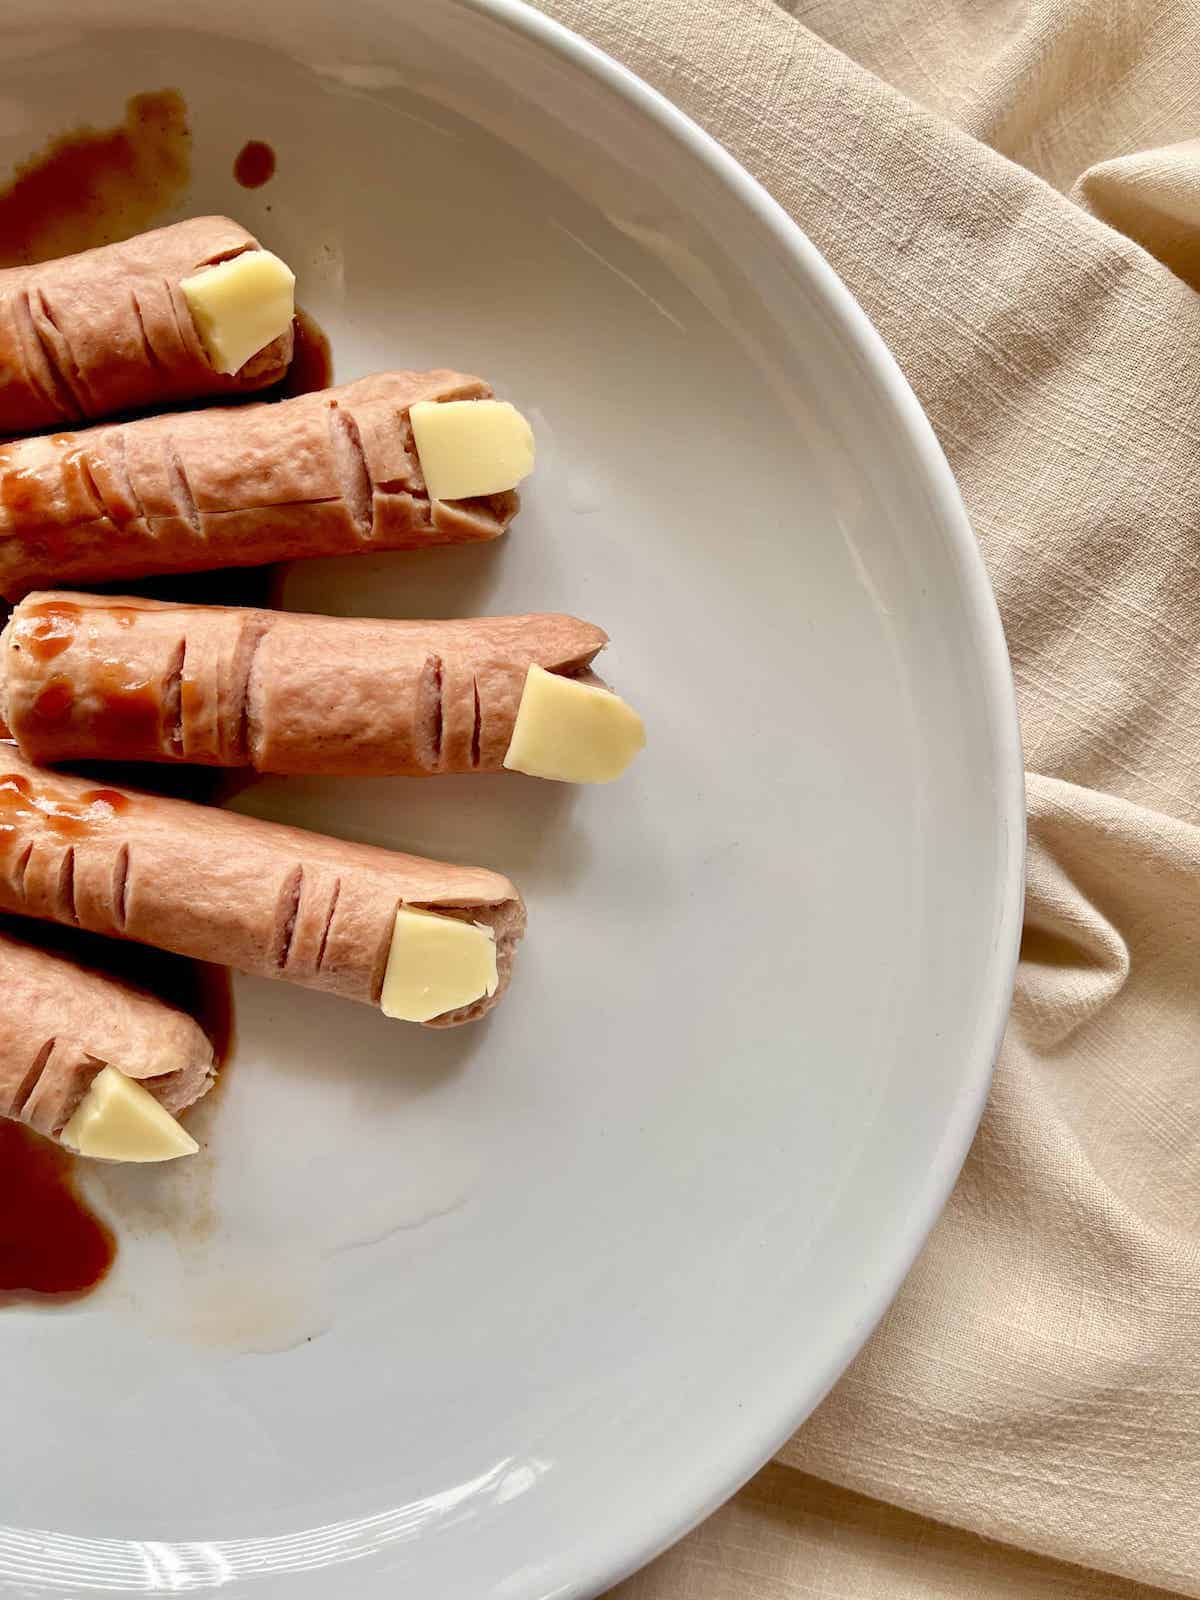 A plate of bloody, wrinkled, severed, Halloween sausage fingers.